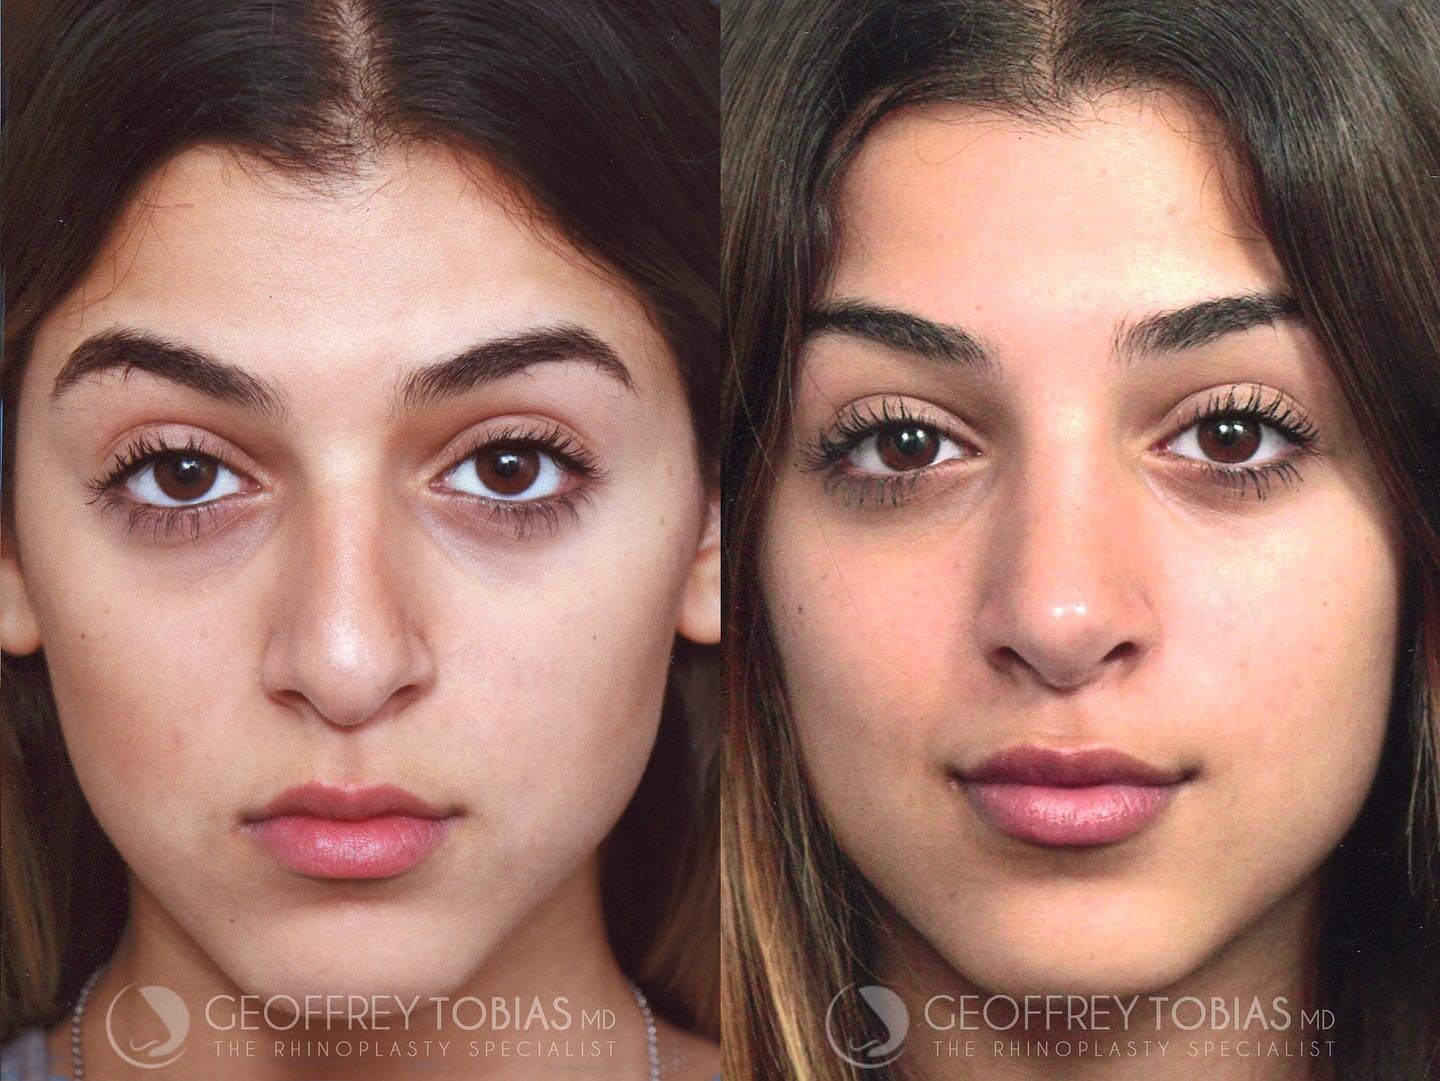 Dr. Tobias&rsquo; goal is always a natural, un-operated look ⚡️⚡️
#contouredbyTobias 
.
.
.
Time: 2.5 hours
Treatment: Closed Rhinoplasty = 🚫 NO SCARS
Downtime: Rapid recovery! 4-7 days until you can return to work/school 
Results: Immediate! Final 